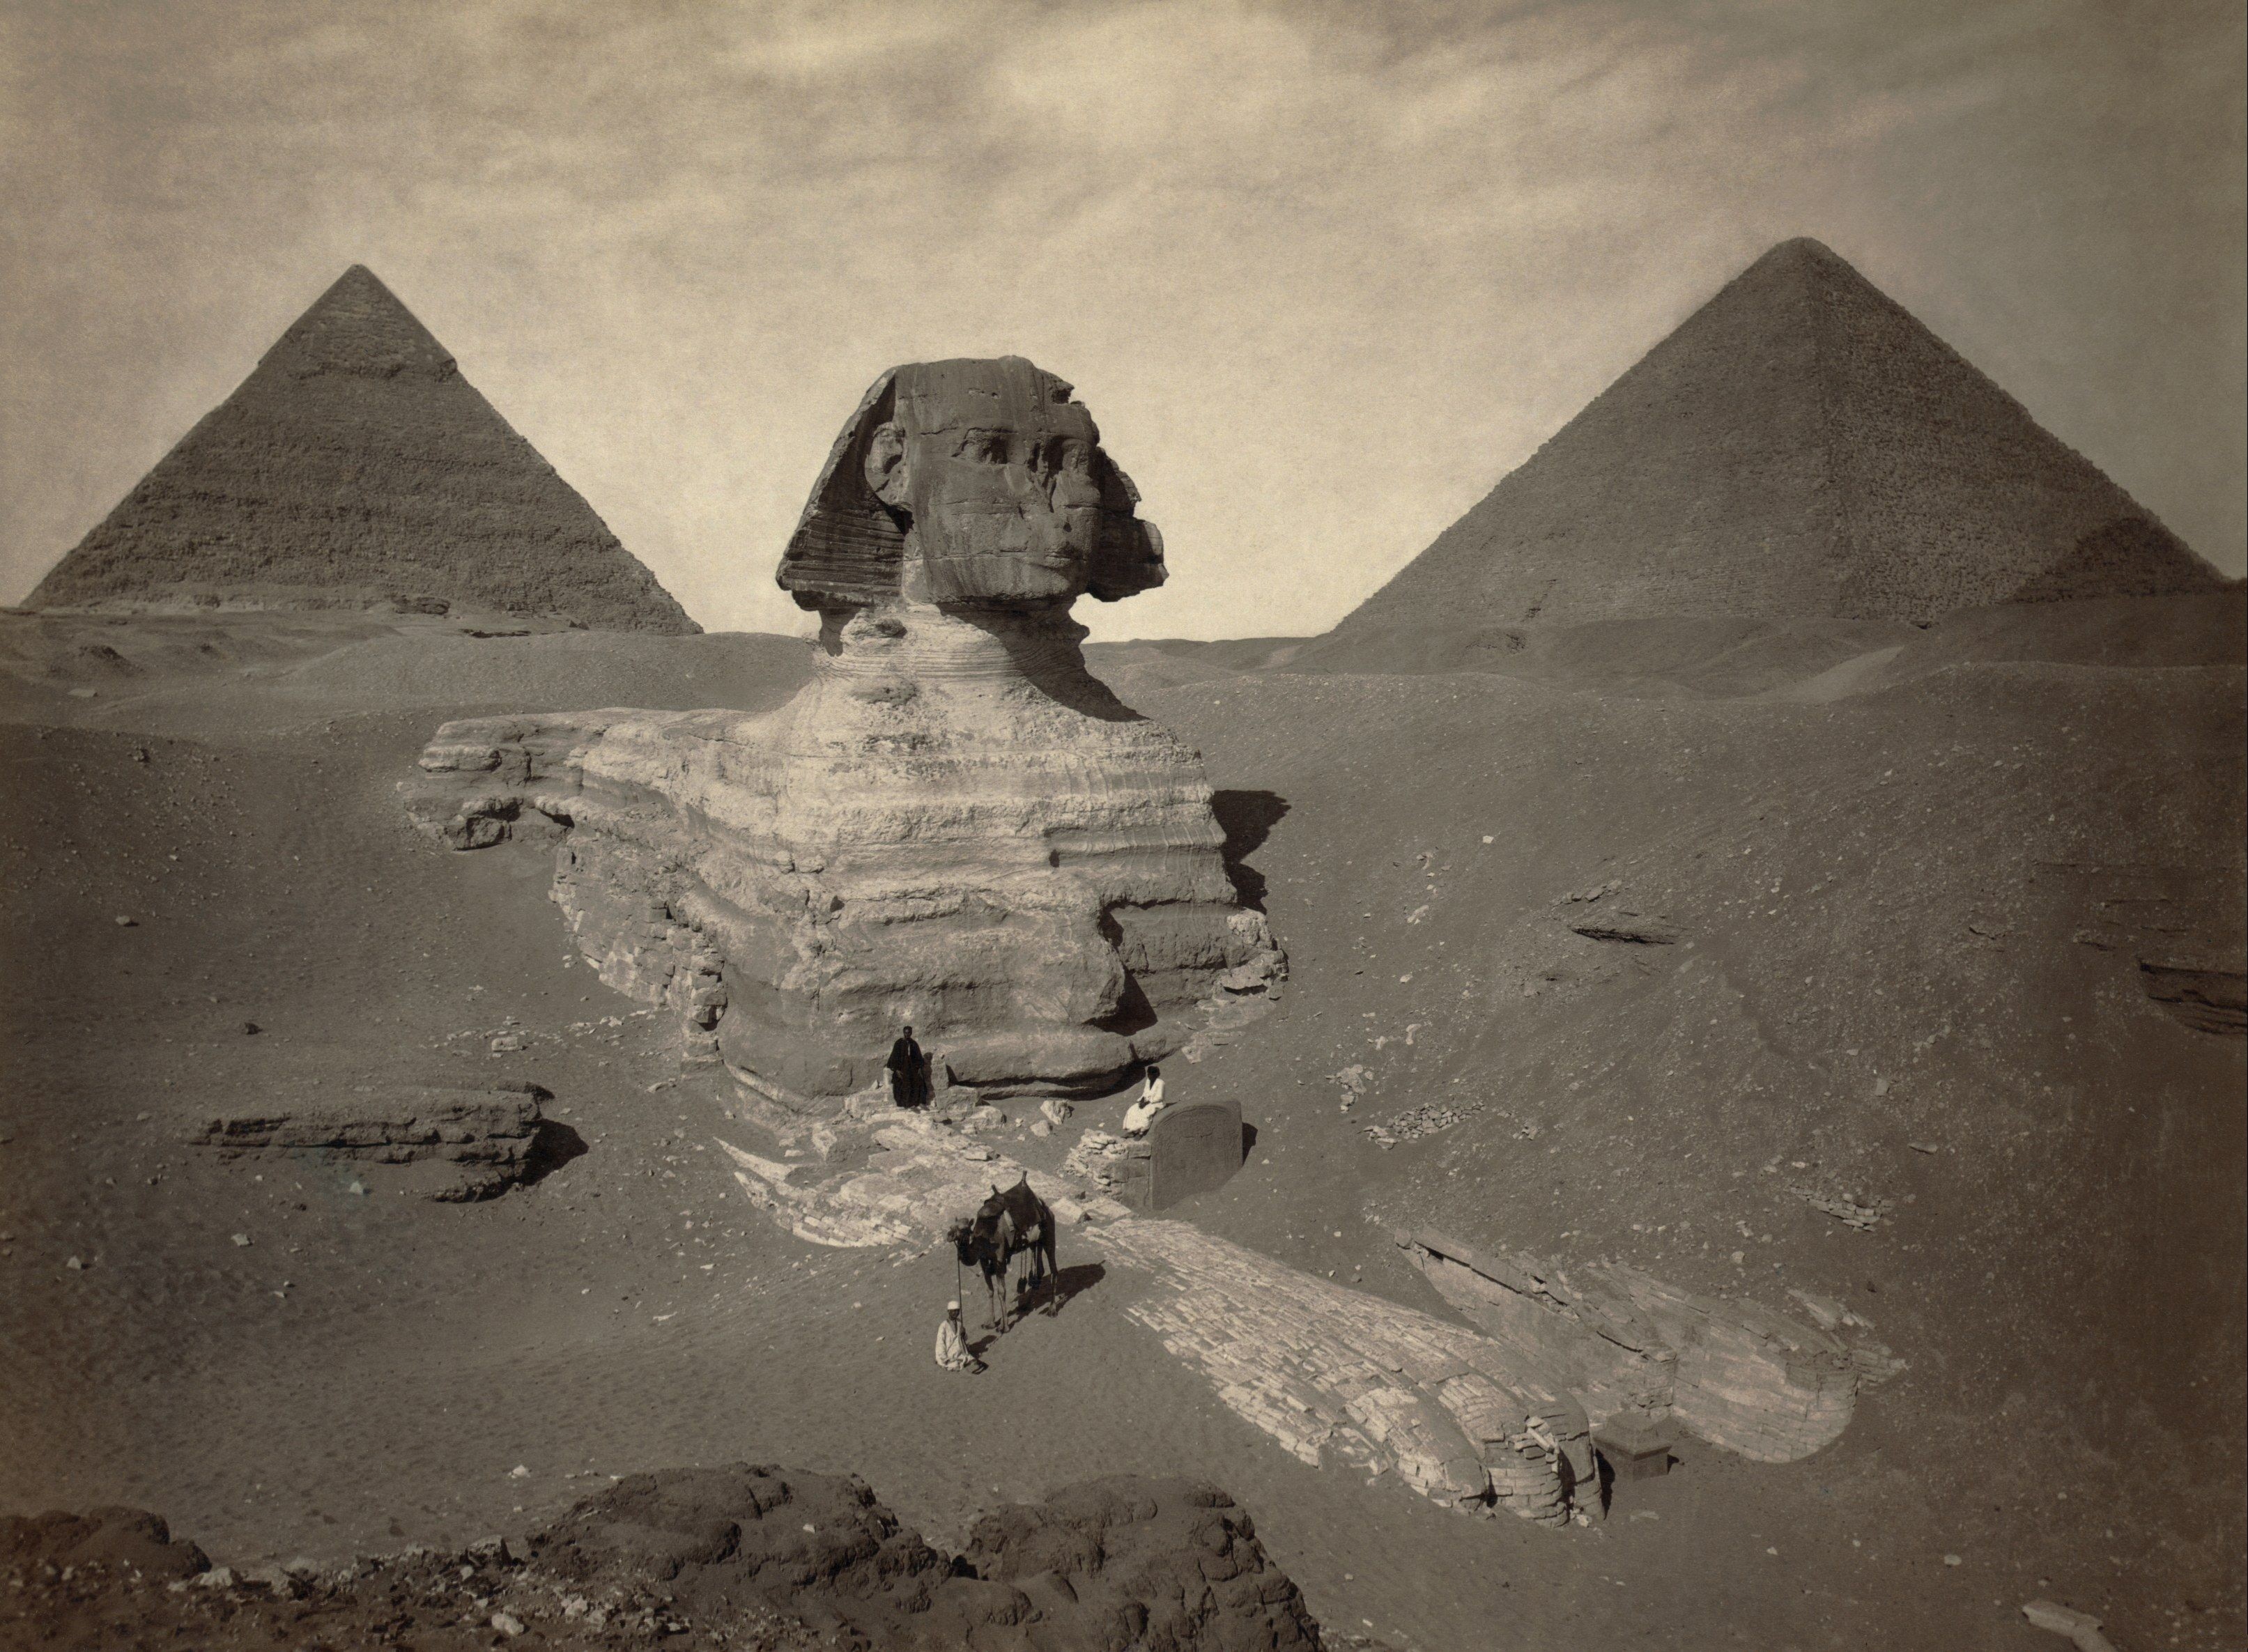 men, Nature, Landscape, Monochrome, Vintage, Old photos, Historic, Egypt, Pyramid, Sphinx, Pyramids of Giza, Sphinx of Giza, Camels, Desert, Sand Wallpaper